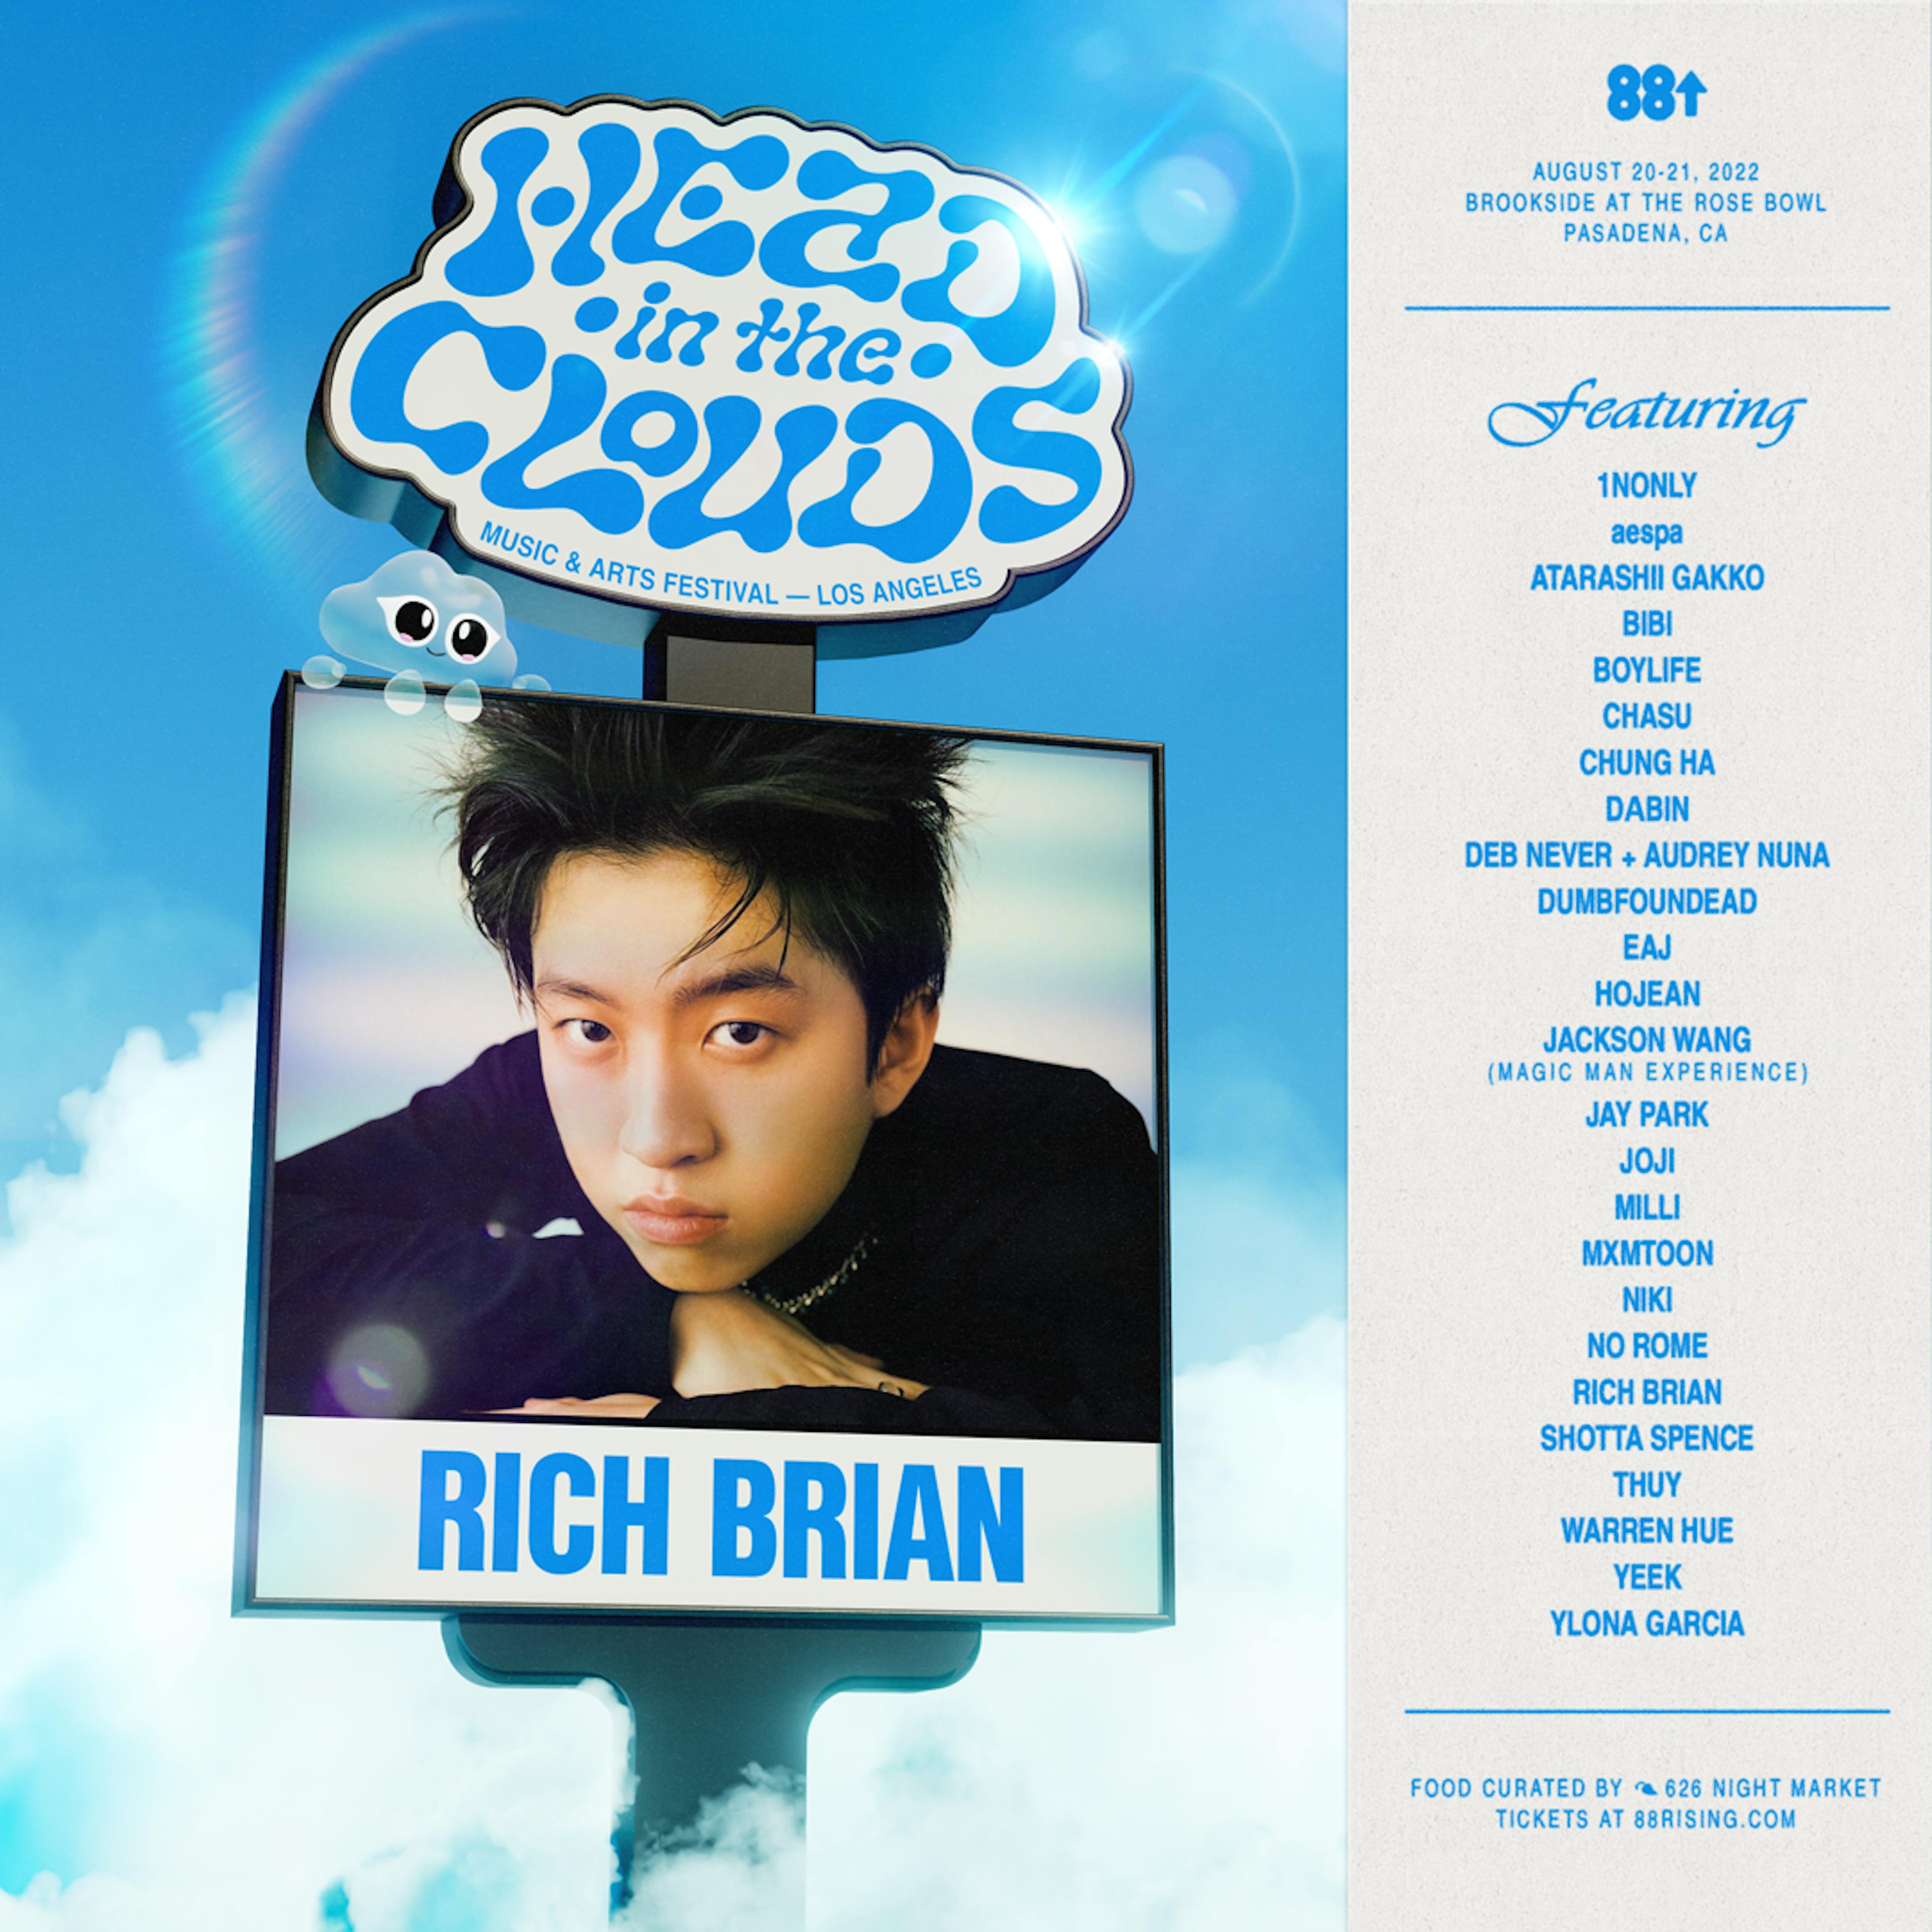 A promotional image for the Head In The Clouds Music & Arts Festival featuring artist Rich Brian. The image displays Rich Brian's portrait on a signpost, with his intense gaze and tousled hair, set against a sky blue background with fluffy clouds. Above the portrait, the festival's logo 'Head in the Clouds' is styled in bold, white, and blue cloud-shaped letters, with the mascot Clo The Cloud God sitting atop. Below the portrait, 'RICH BRIAN' is written in large blue letters, and the event details are noted, including the festival's date and location at Brookside at the Rose Bowl, Pasadena, CA. 